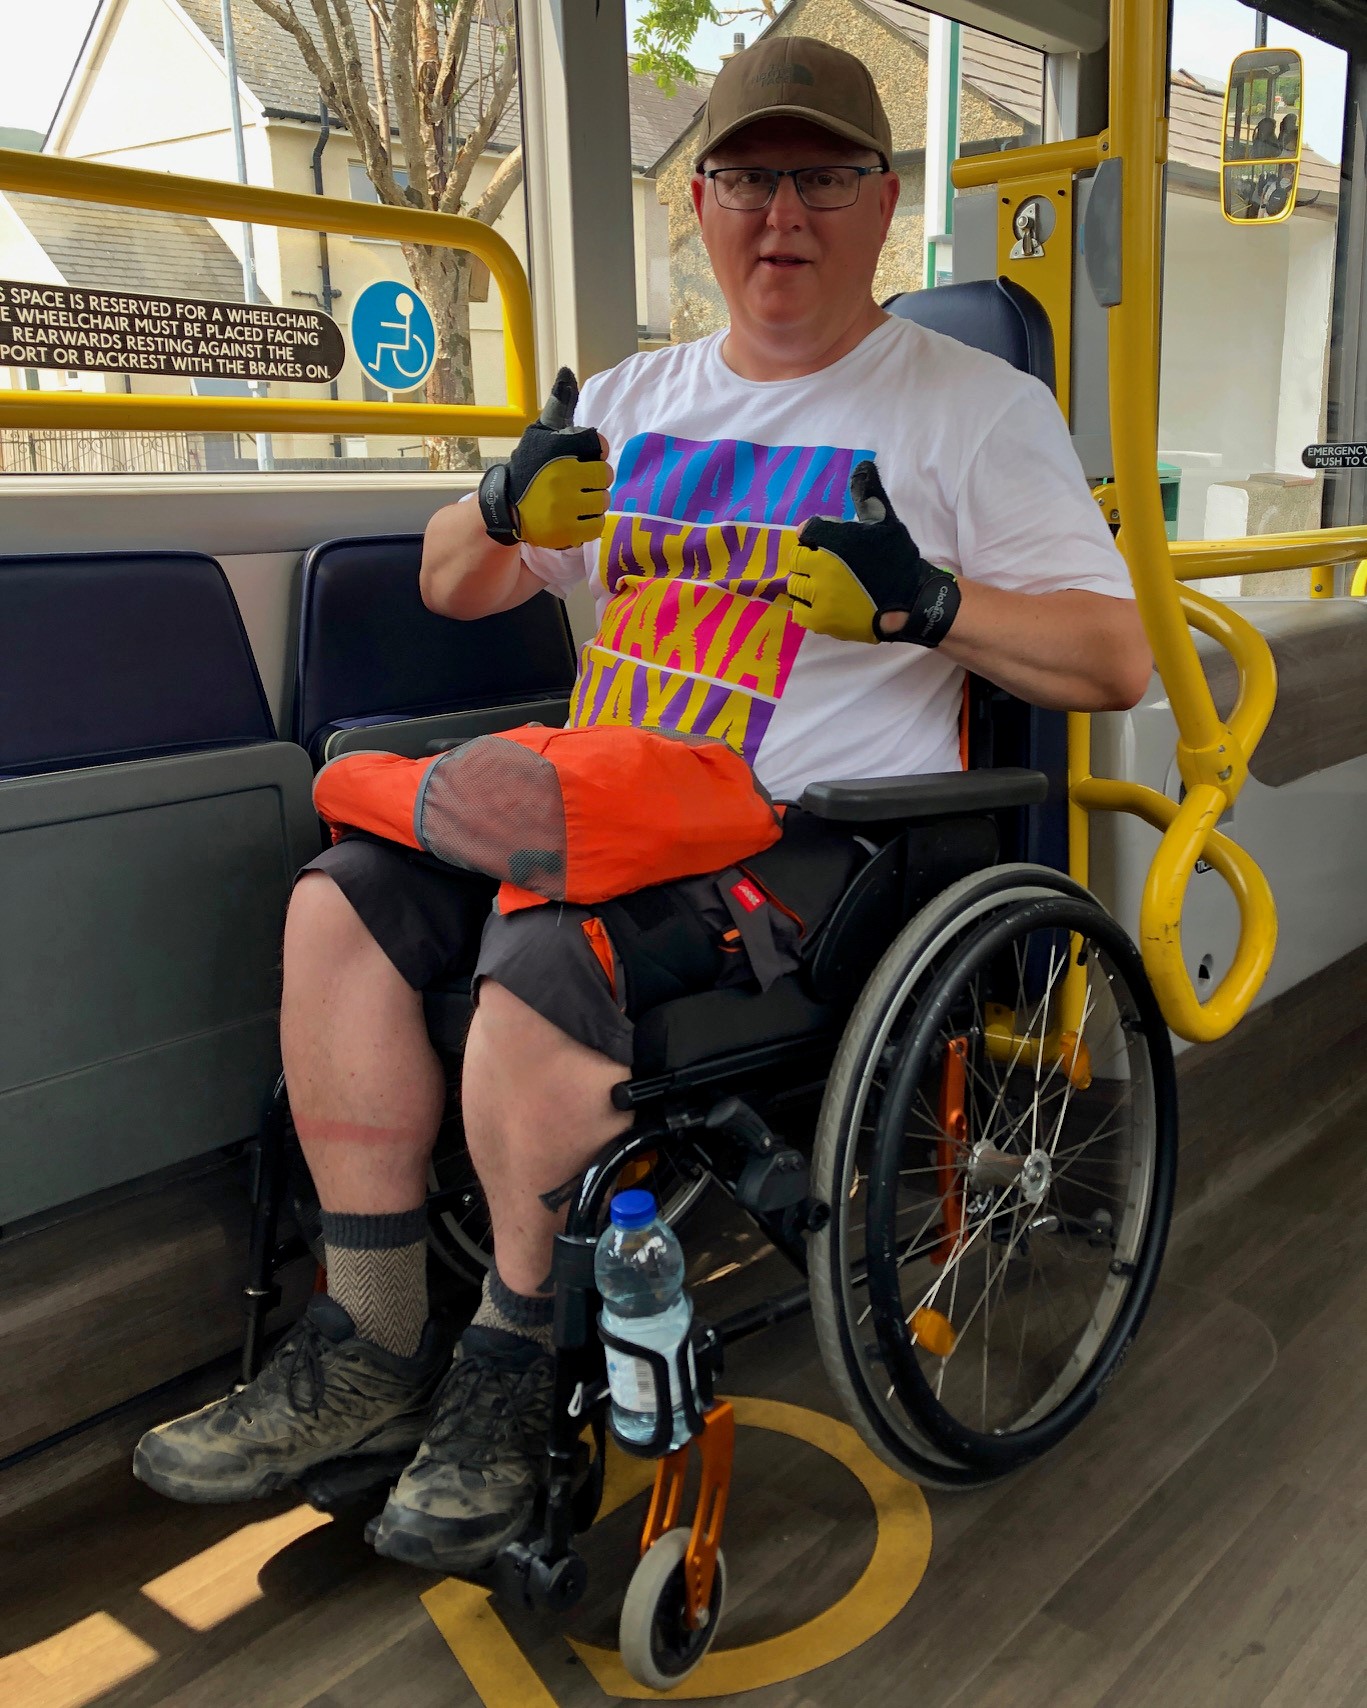 Man sitting in a wheelchair, with his thumbs up